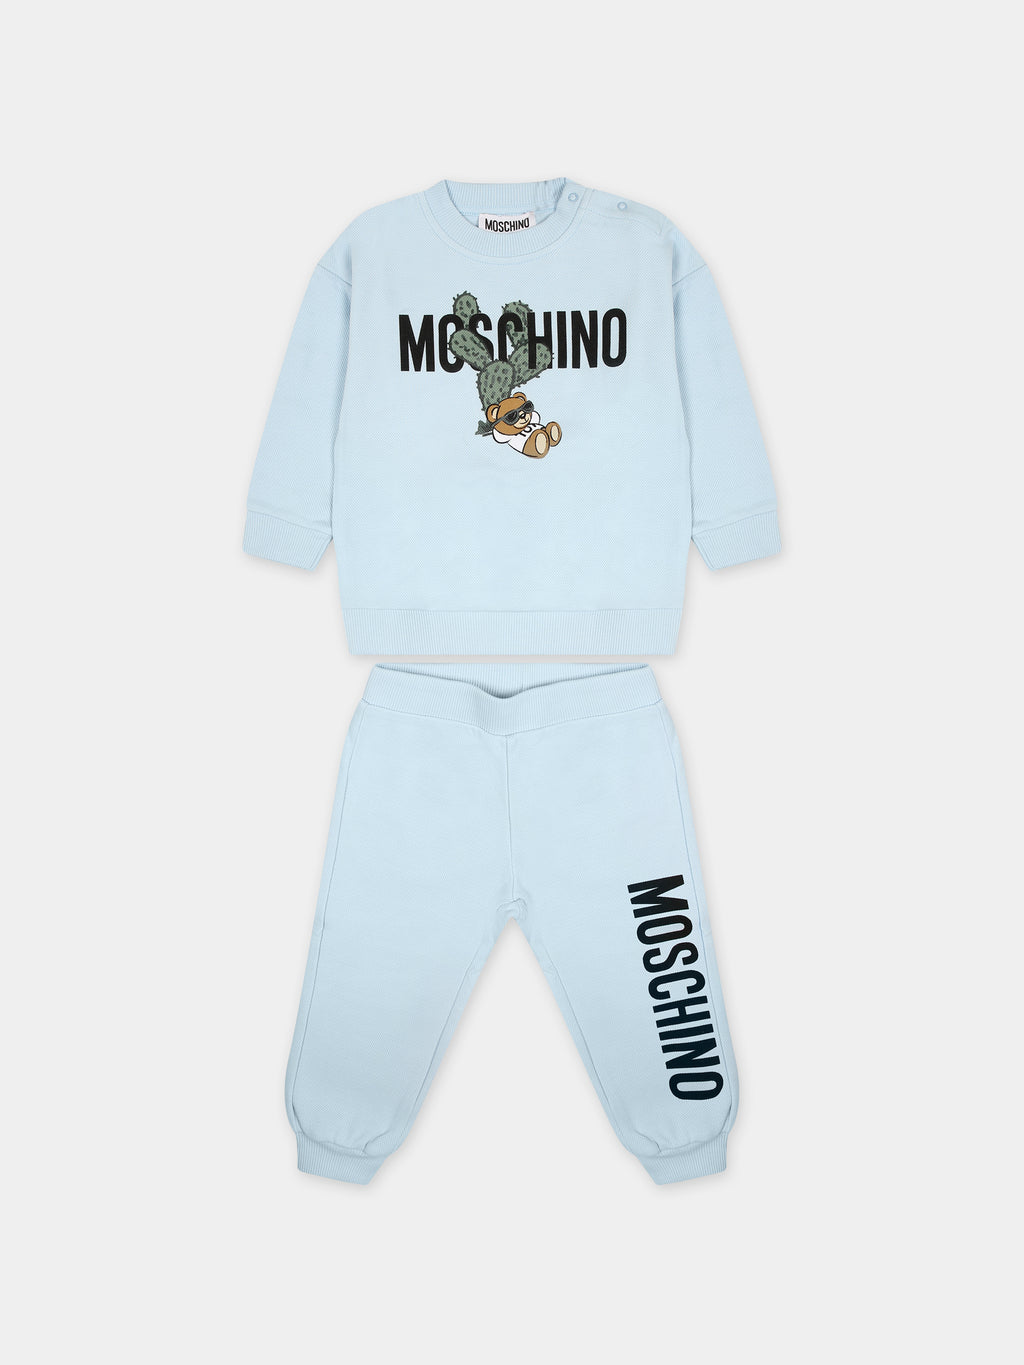 Light blue set  for baby boy with Teddy bear and logo